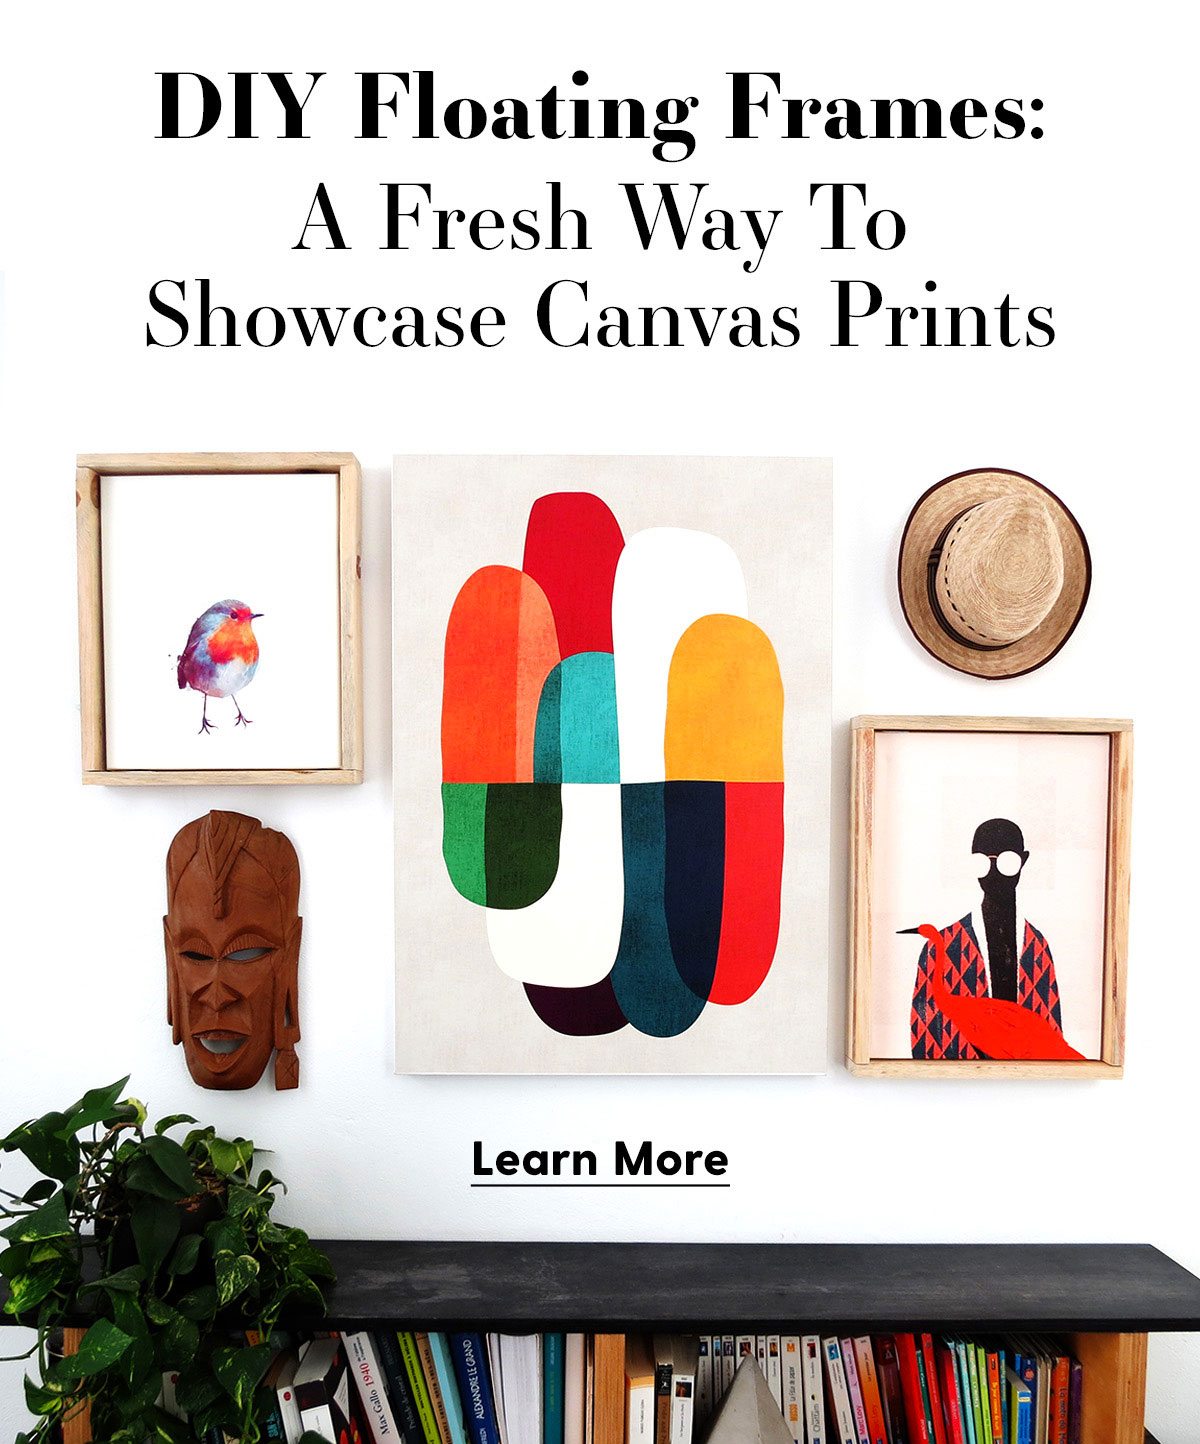 DIY Floating Frames: A Fresh Way To Showcase Canvas Prints. Learn More